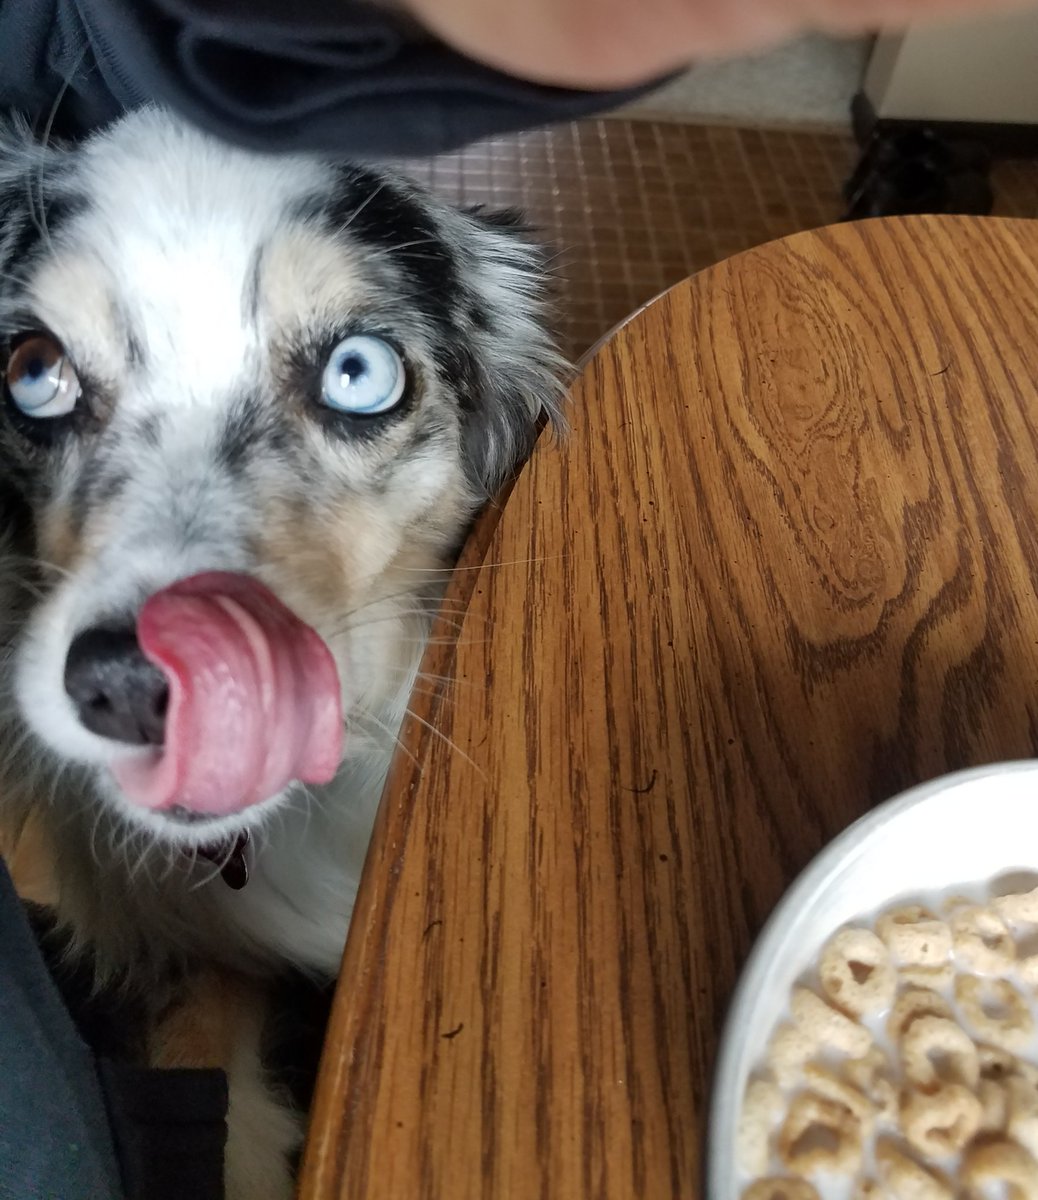 #tongueouttuesday Mom has cereal, share please! 😋